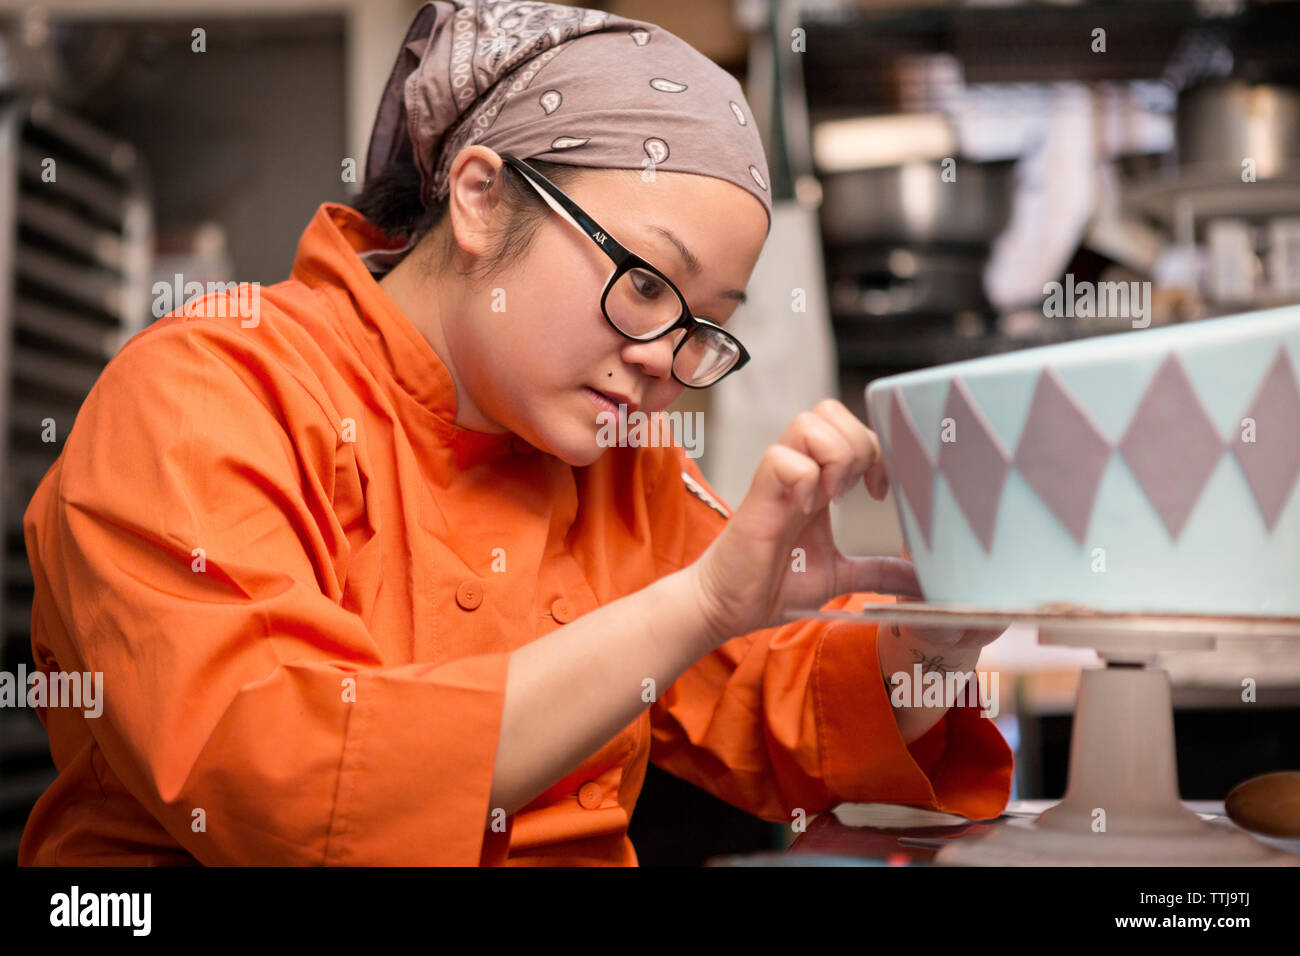 Woman decorating cake at store Stock Photo